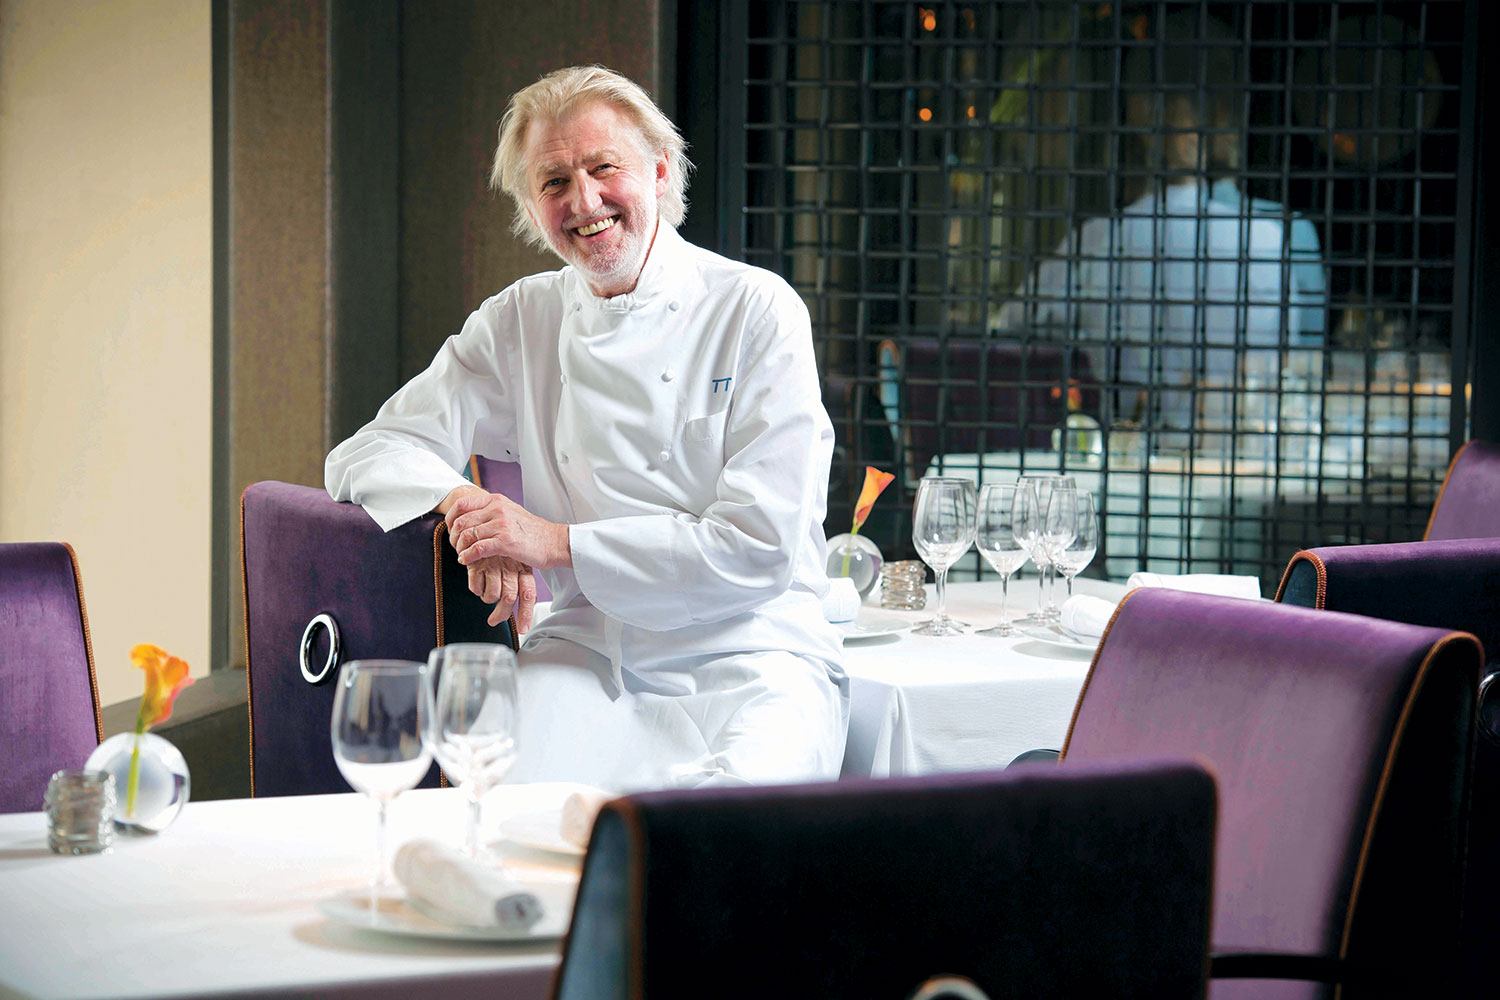 The Best Chef In The World Pierre Gagnaire On How His Food Is Art Hashtag Legend - Pierre Gagnaire Restaurant